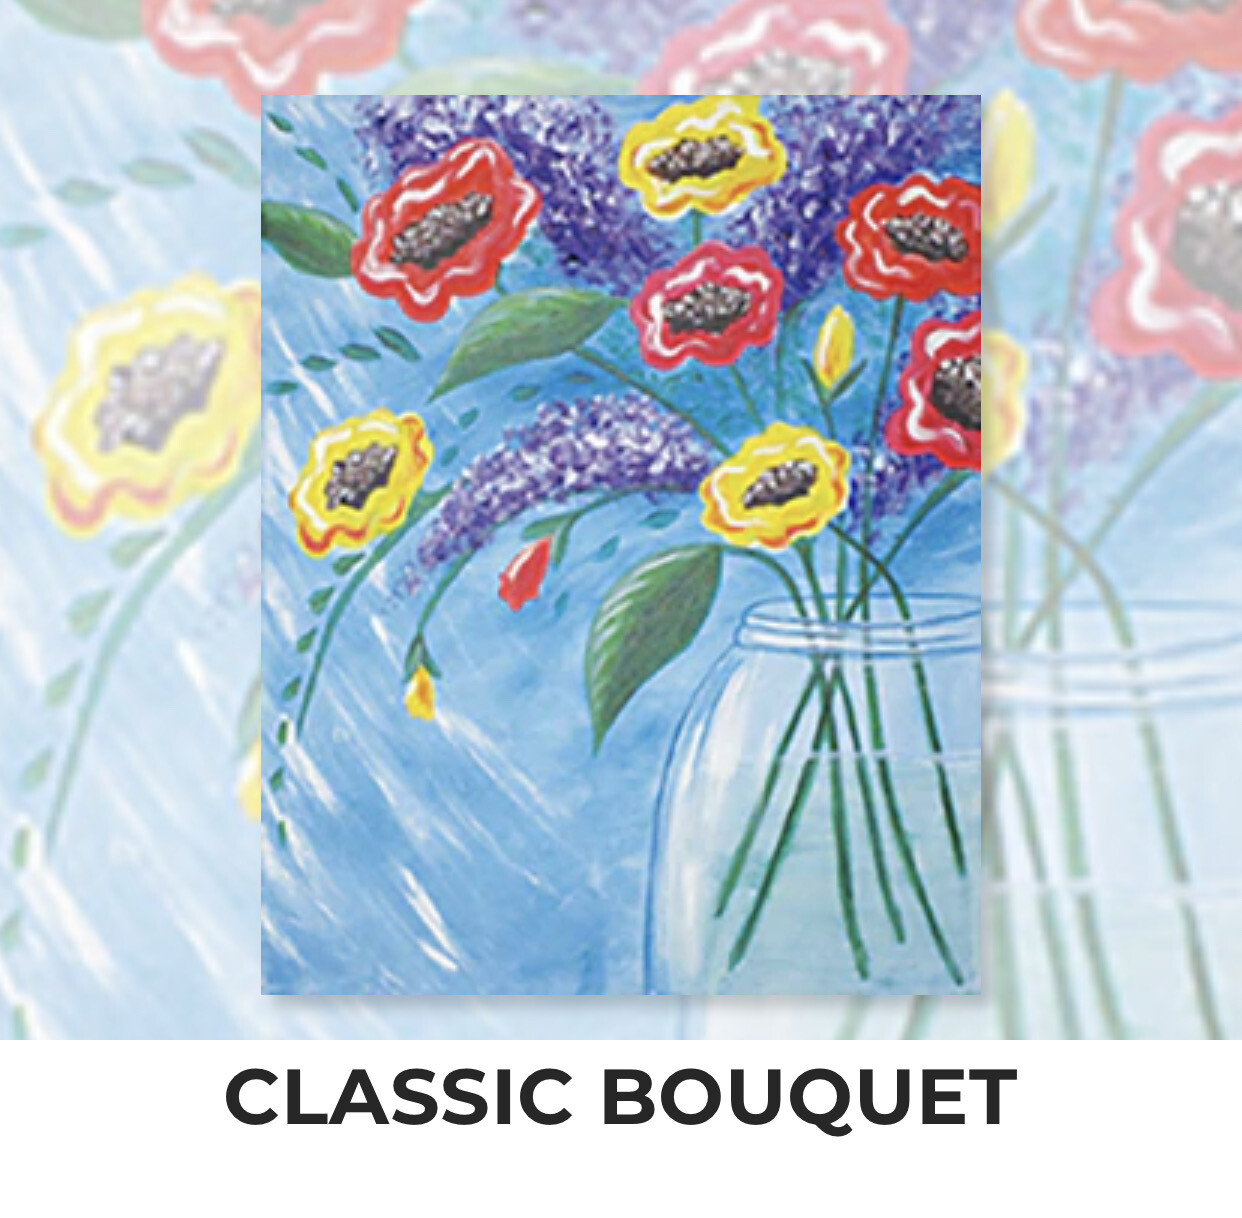 Classic Bouquet ADULT Acrylic Paint On Canvas DIY Art Kit - 3 Week Special Order